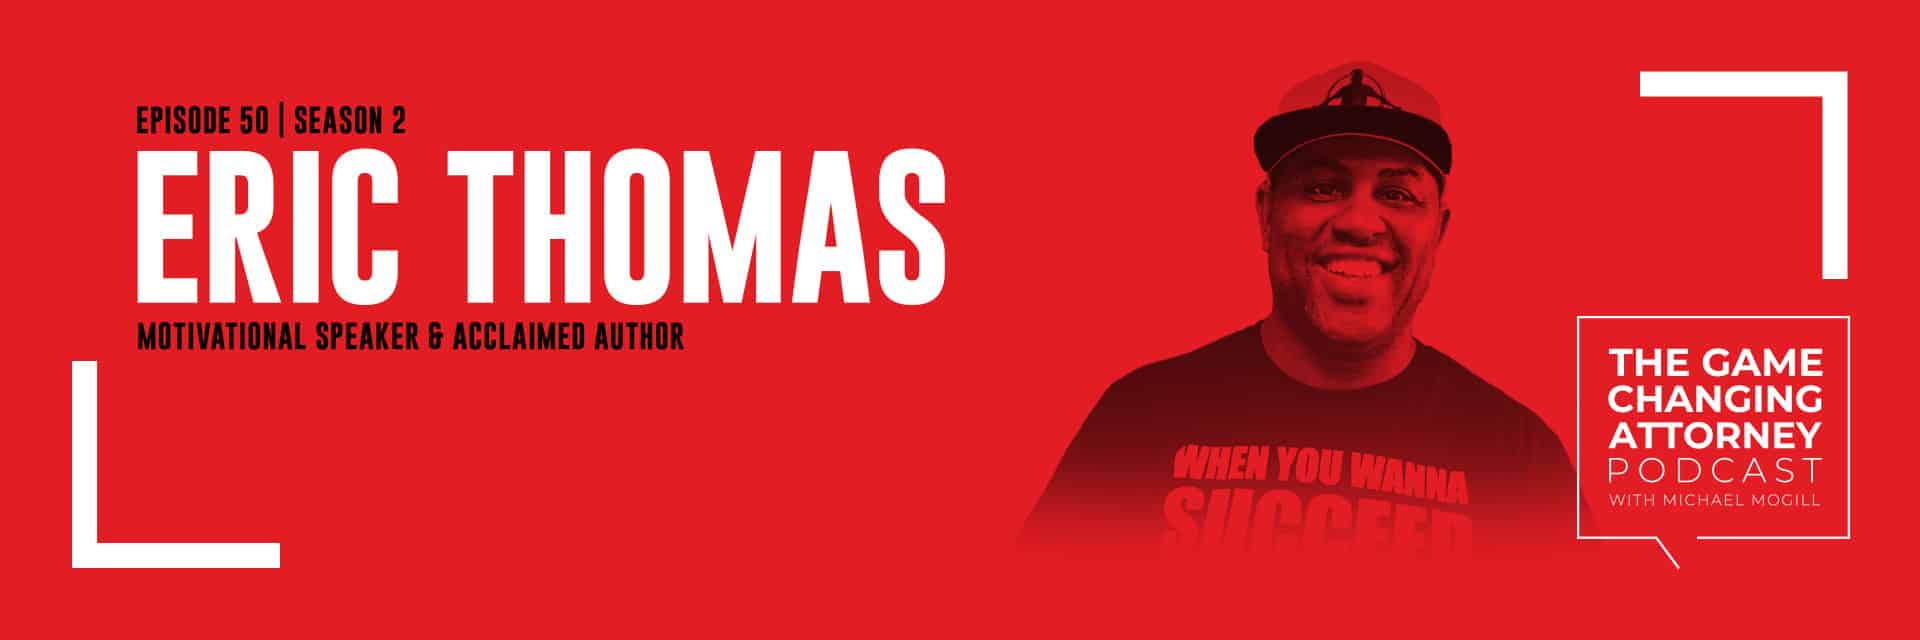 Eric Thomas - The Game Changing Attorney Podcast - Desktop